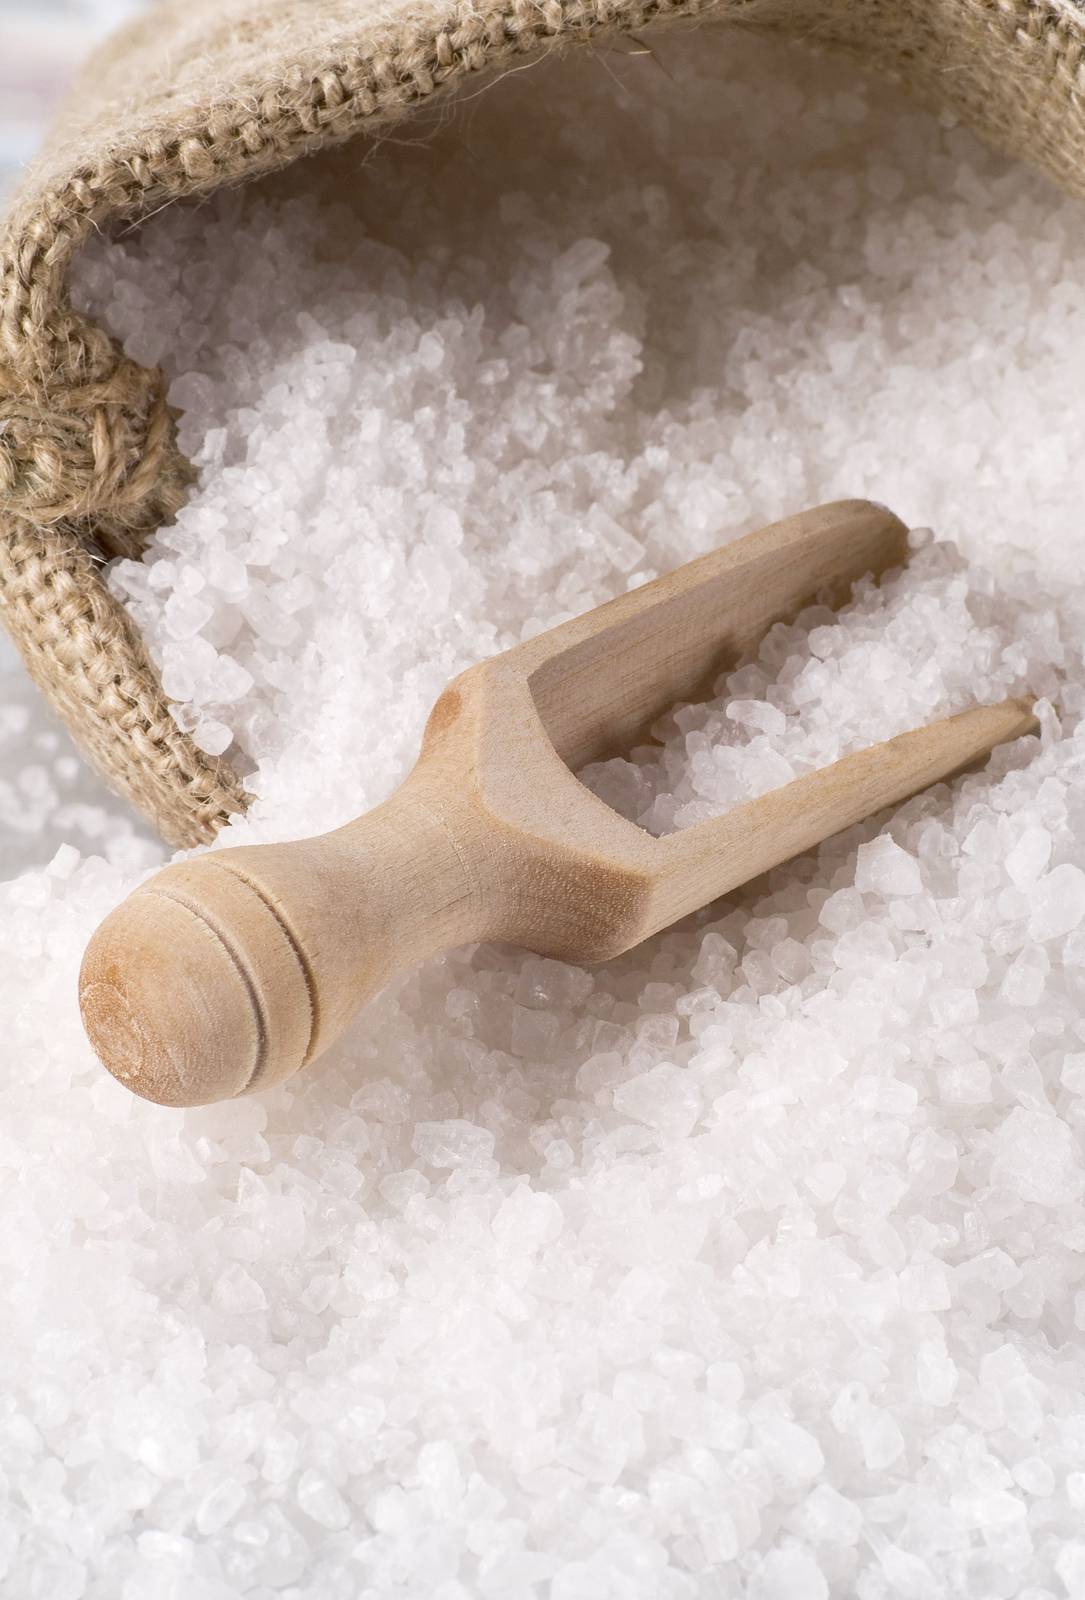 A&B Ingredients Reports Significant Gains for Low Sodium Sea Salts